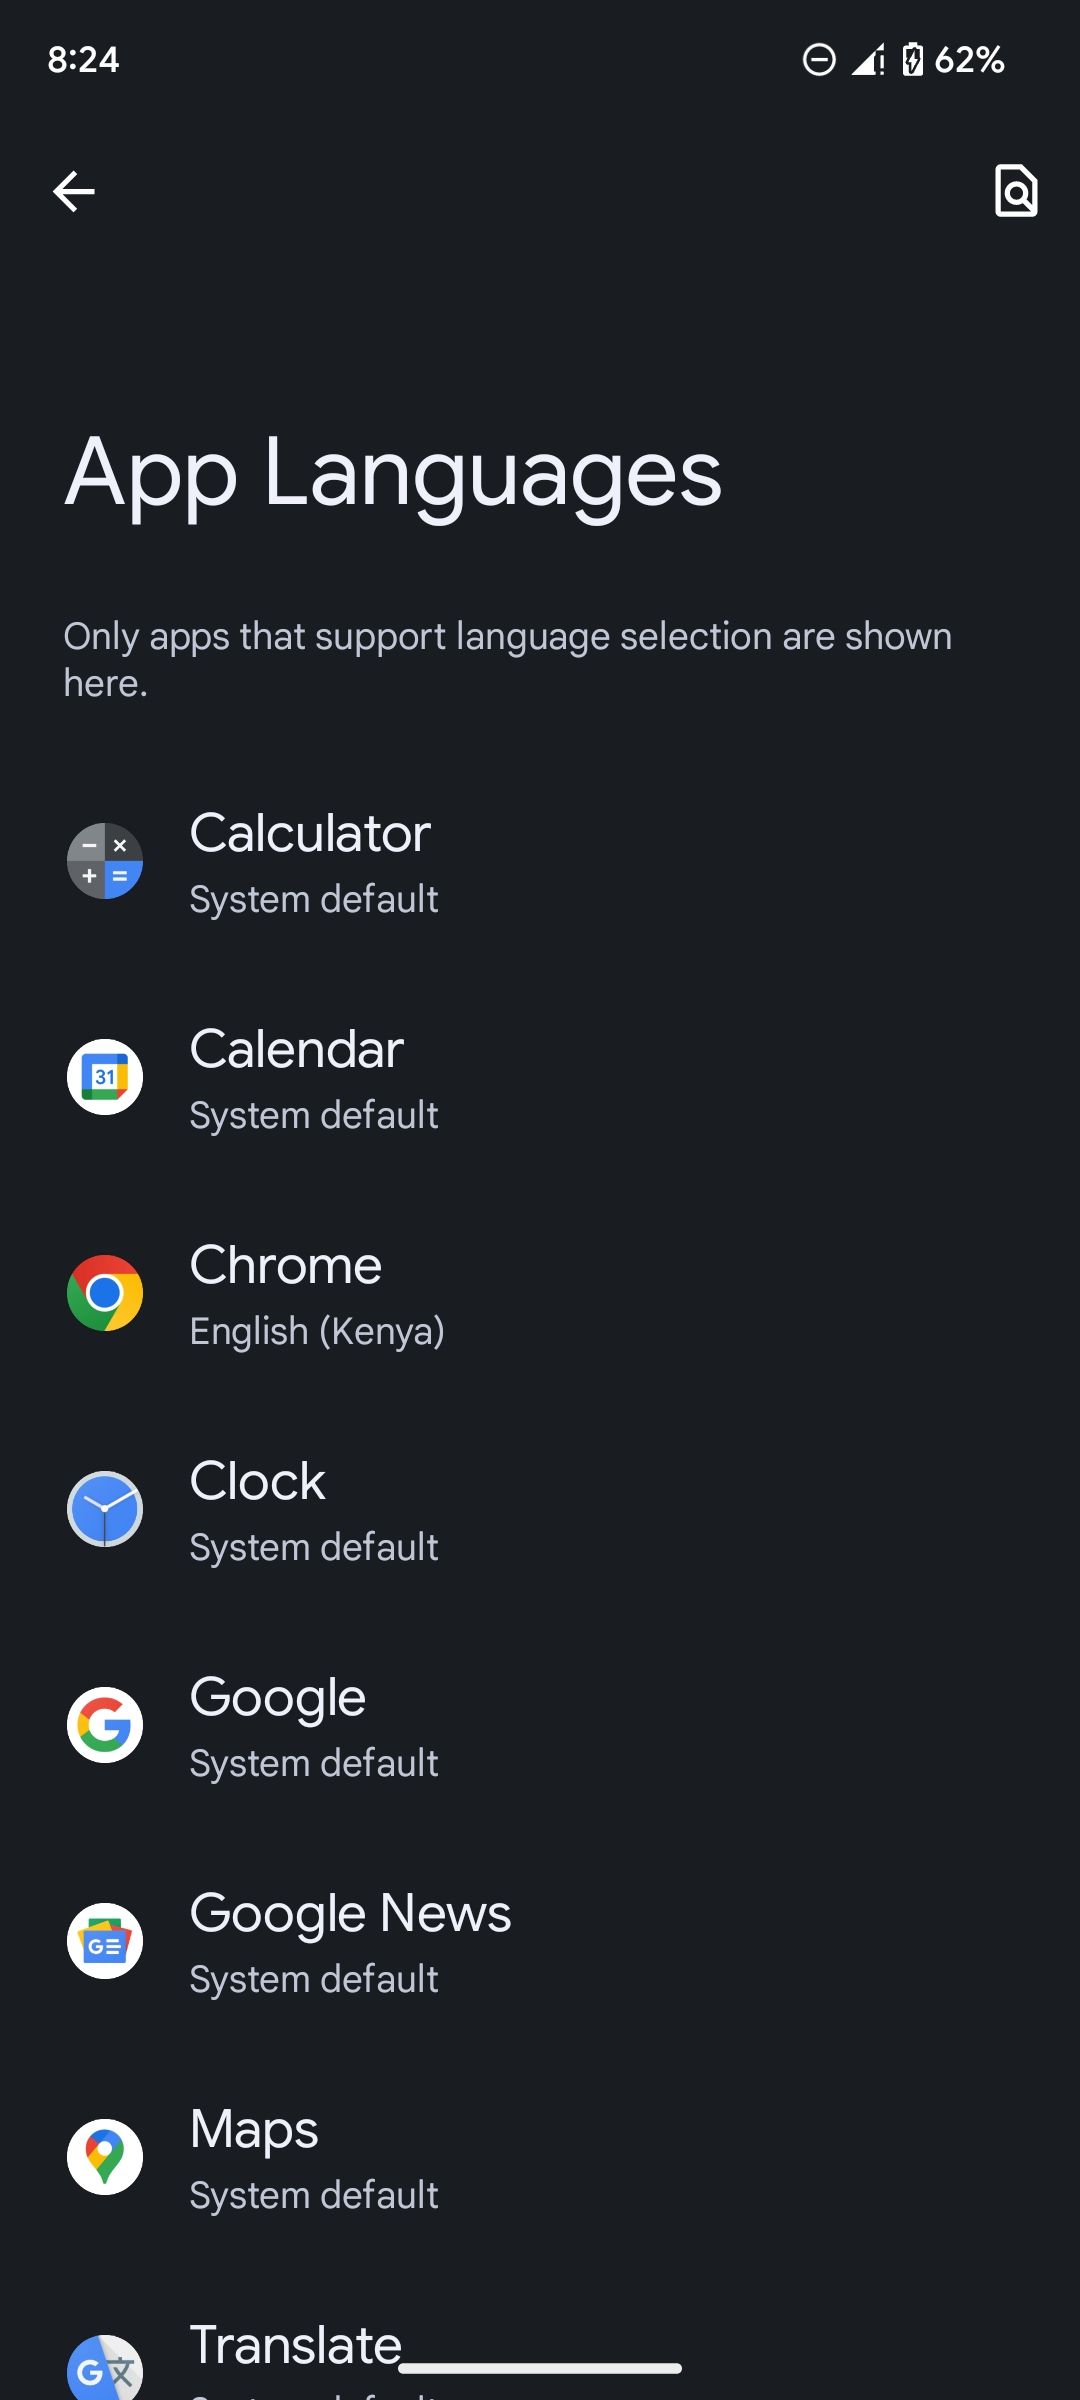 App languages page on Android